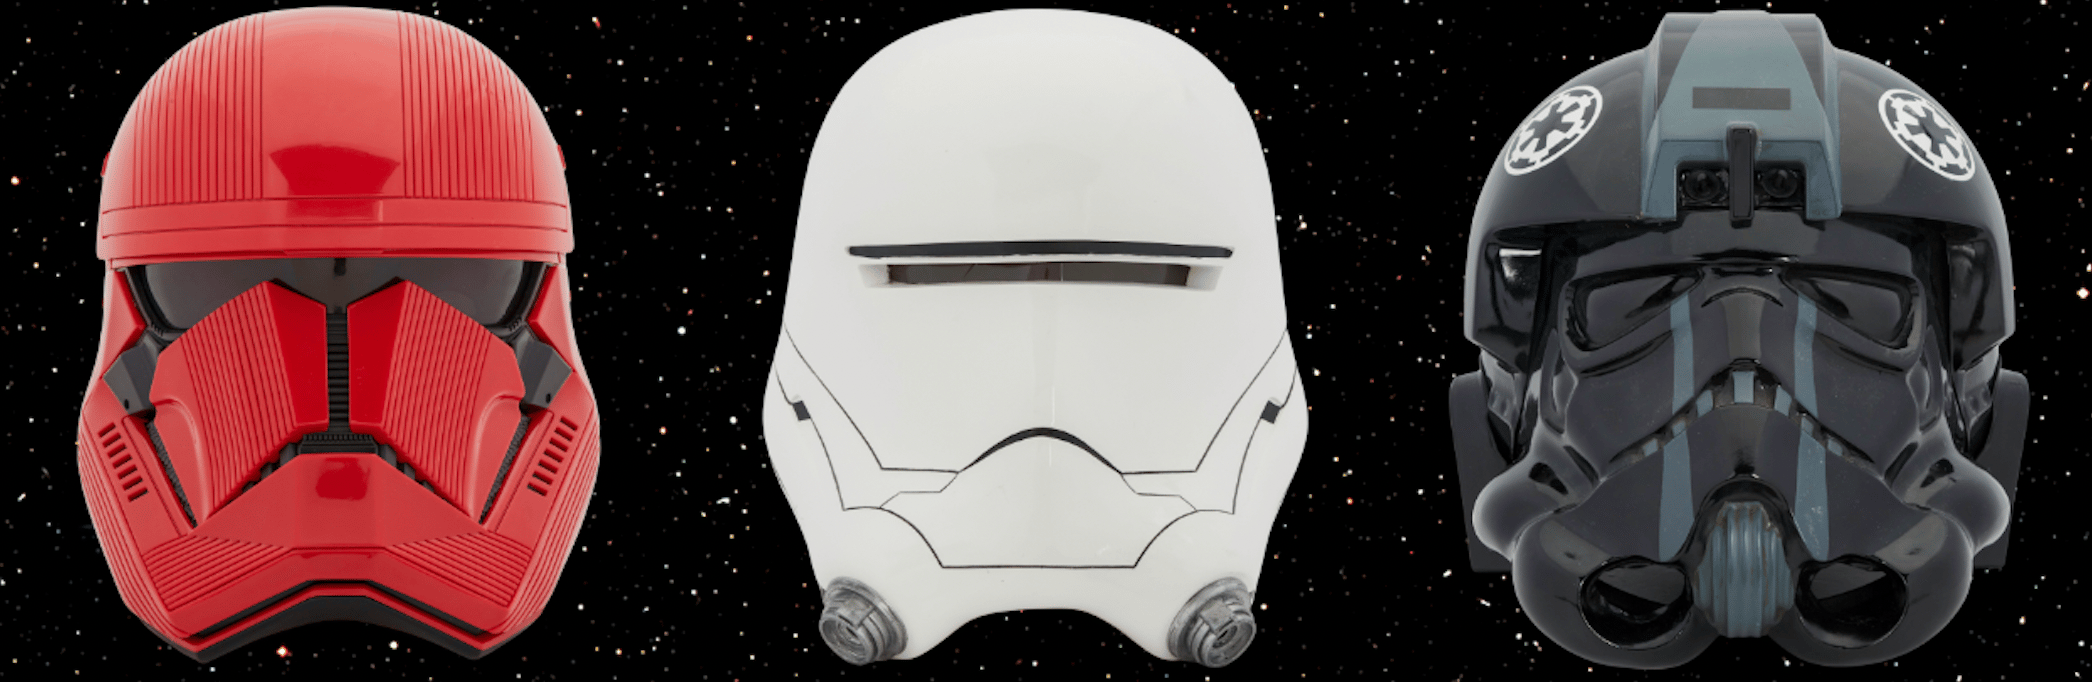 a red white and black storm trooper helmet